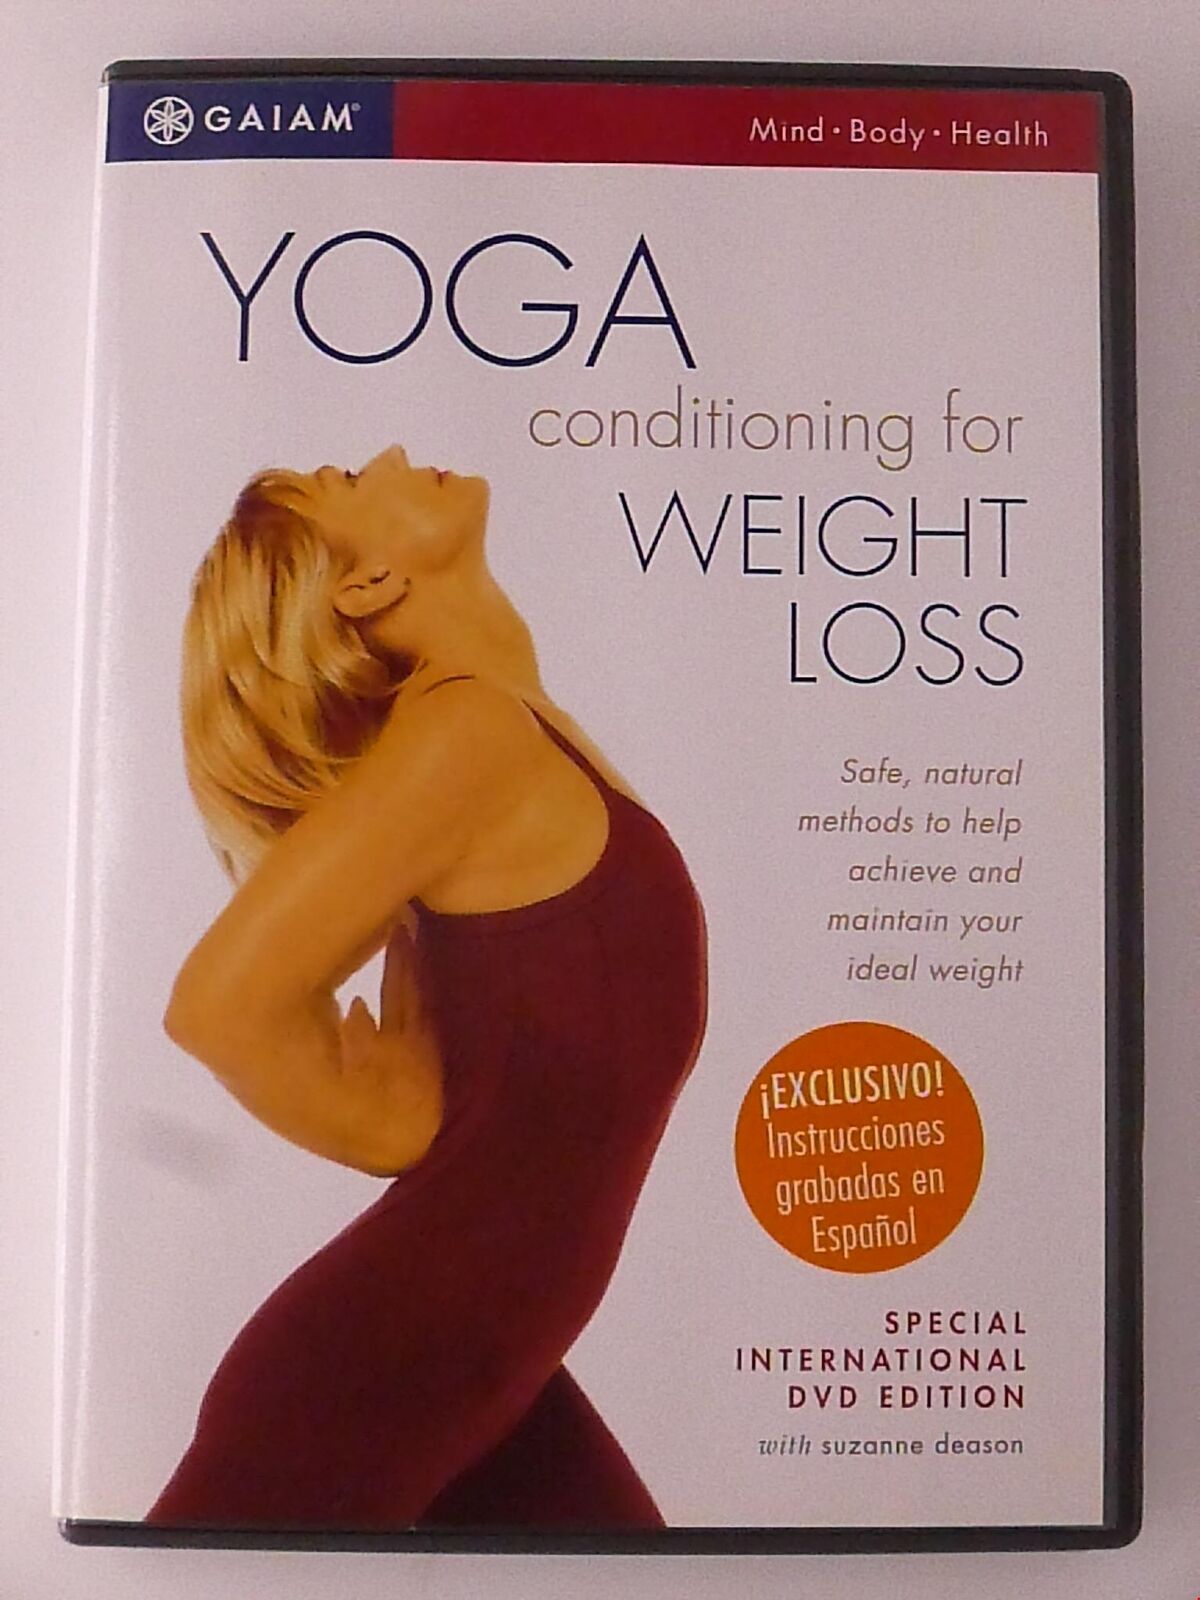 Yoga Conditioning for Weight Loss (DVD, exercise, Gaiam) - J0409